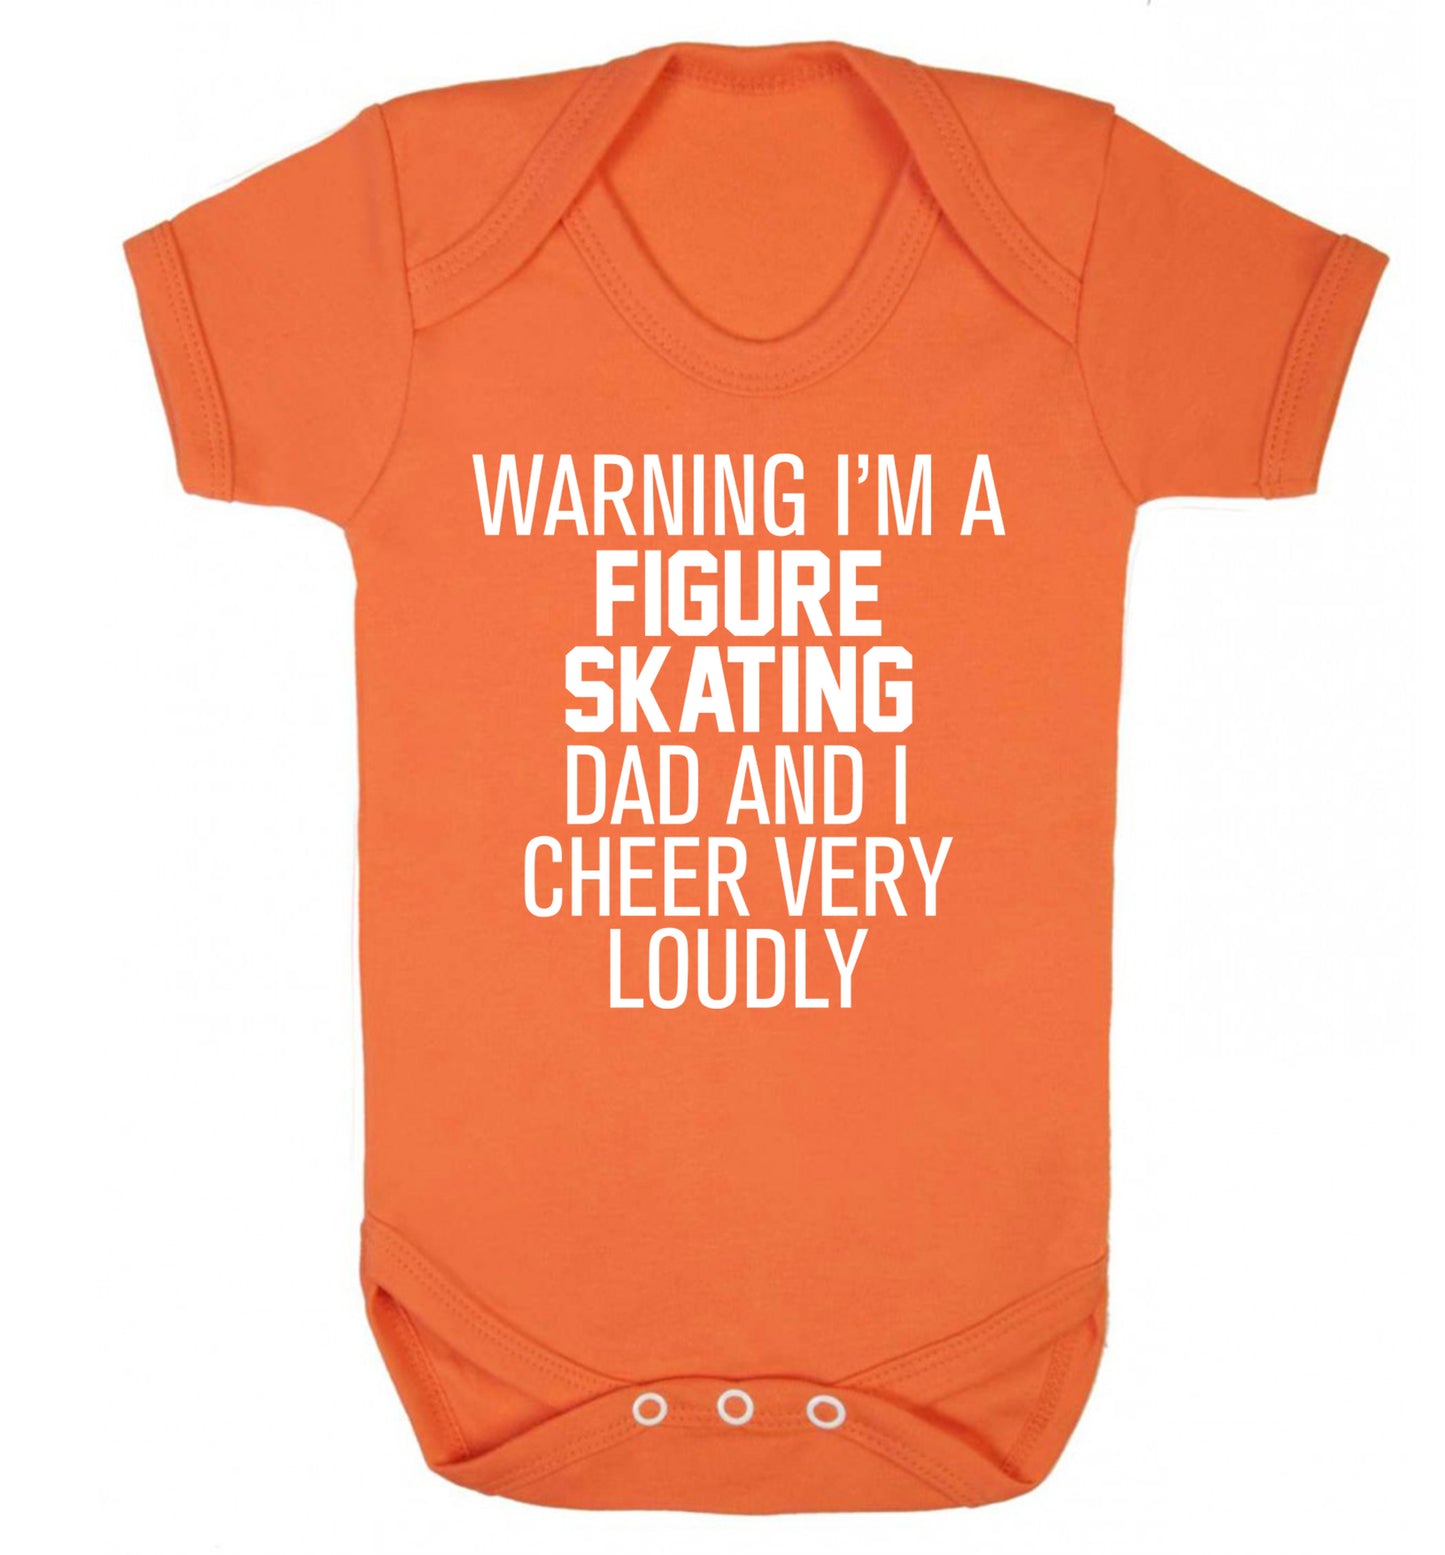 Warning I'm a figure skating dad and I cheer very loudly Baby Vest orange 18-24 months